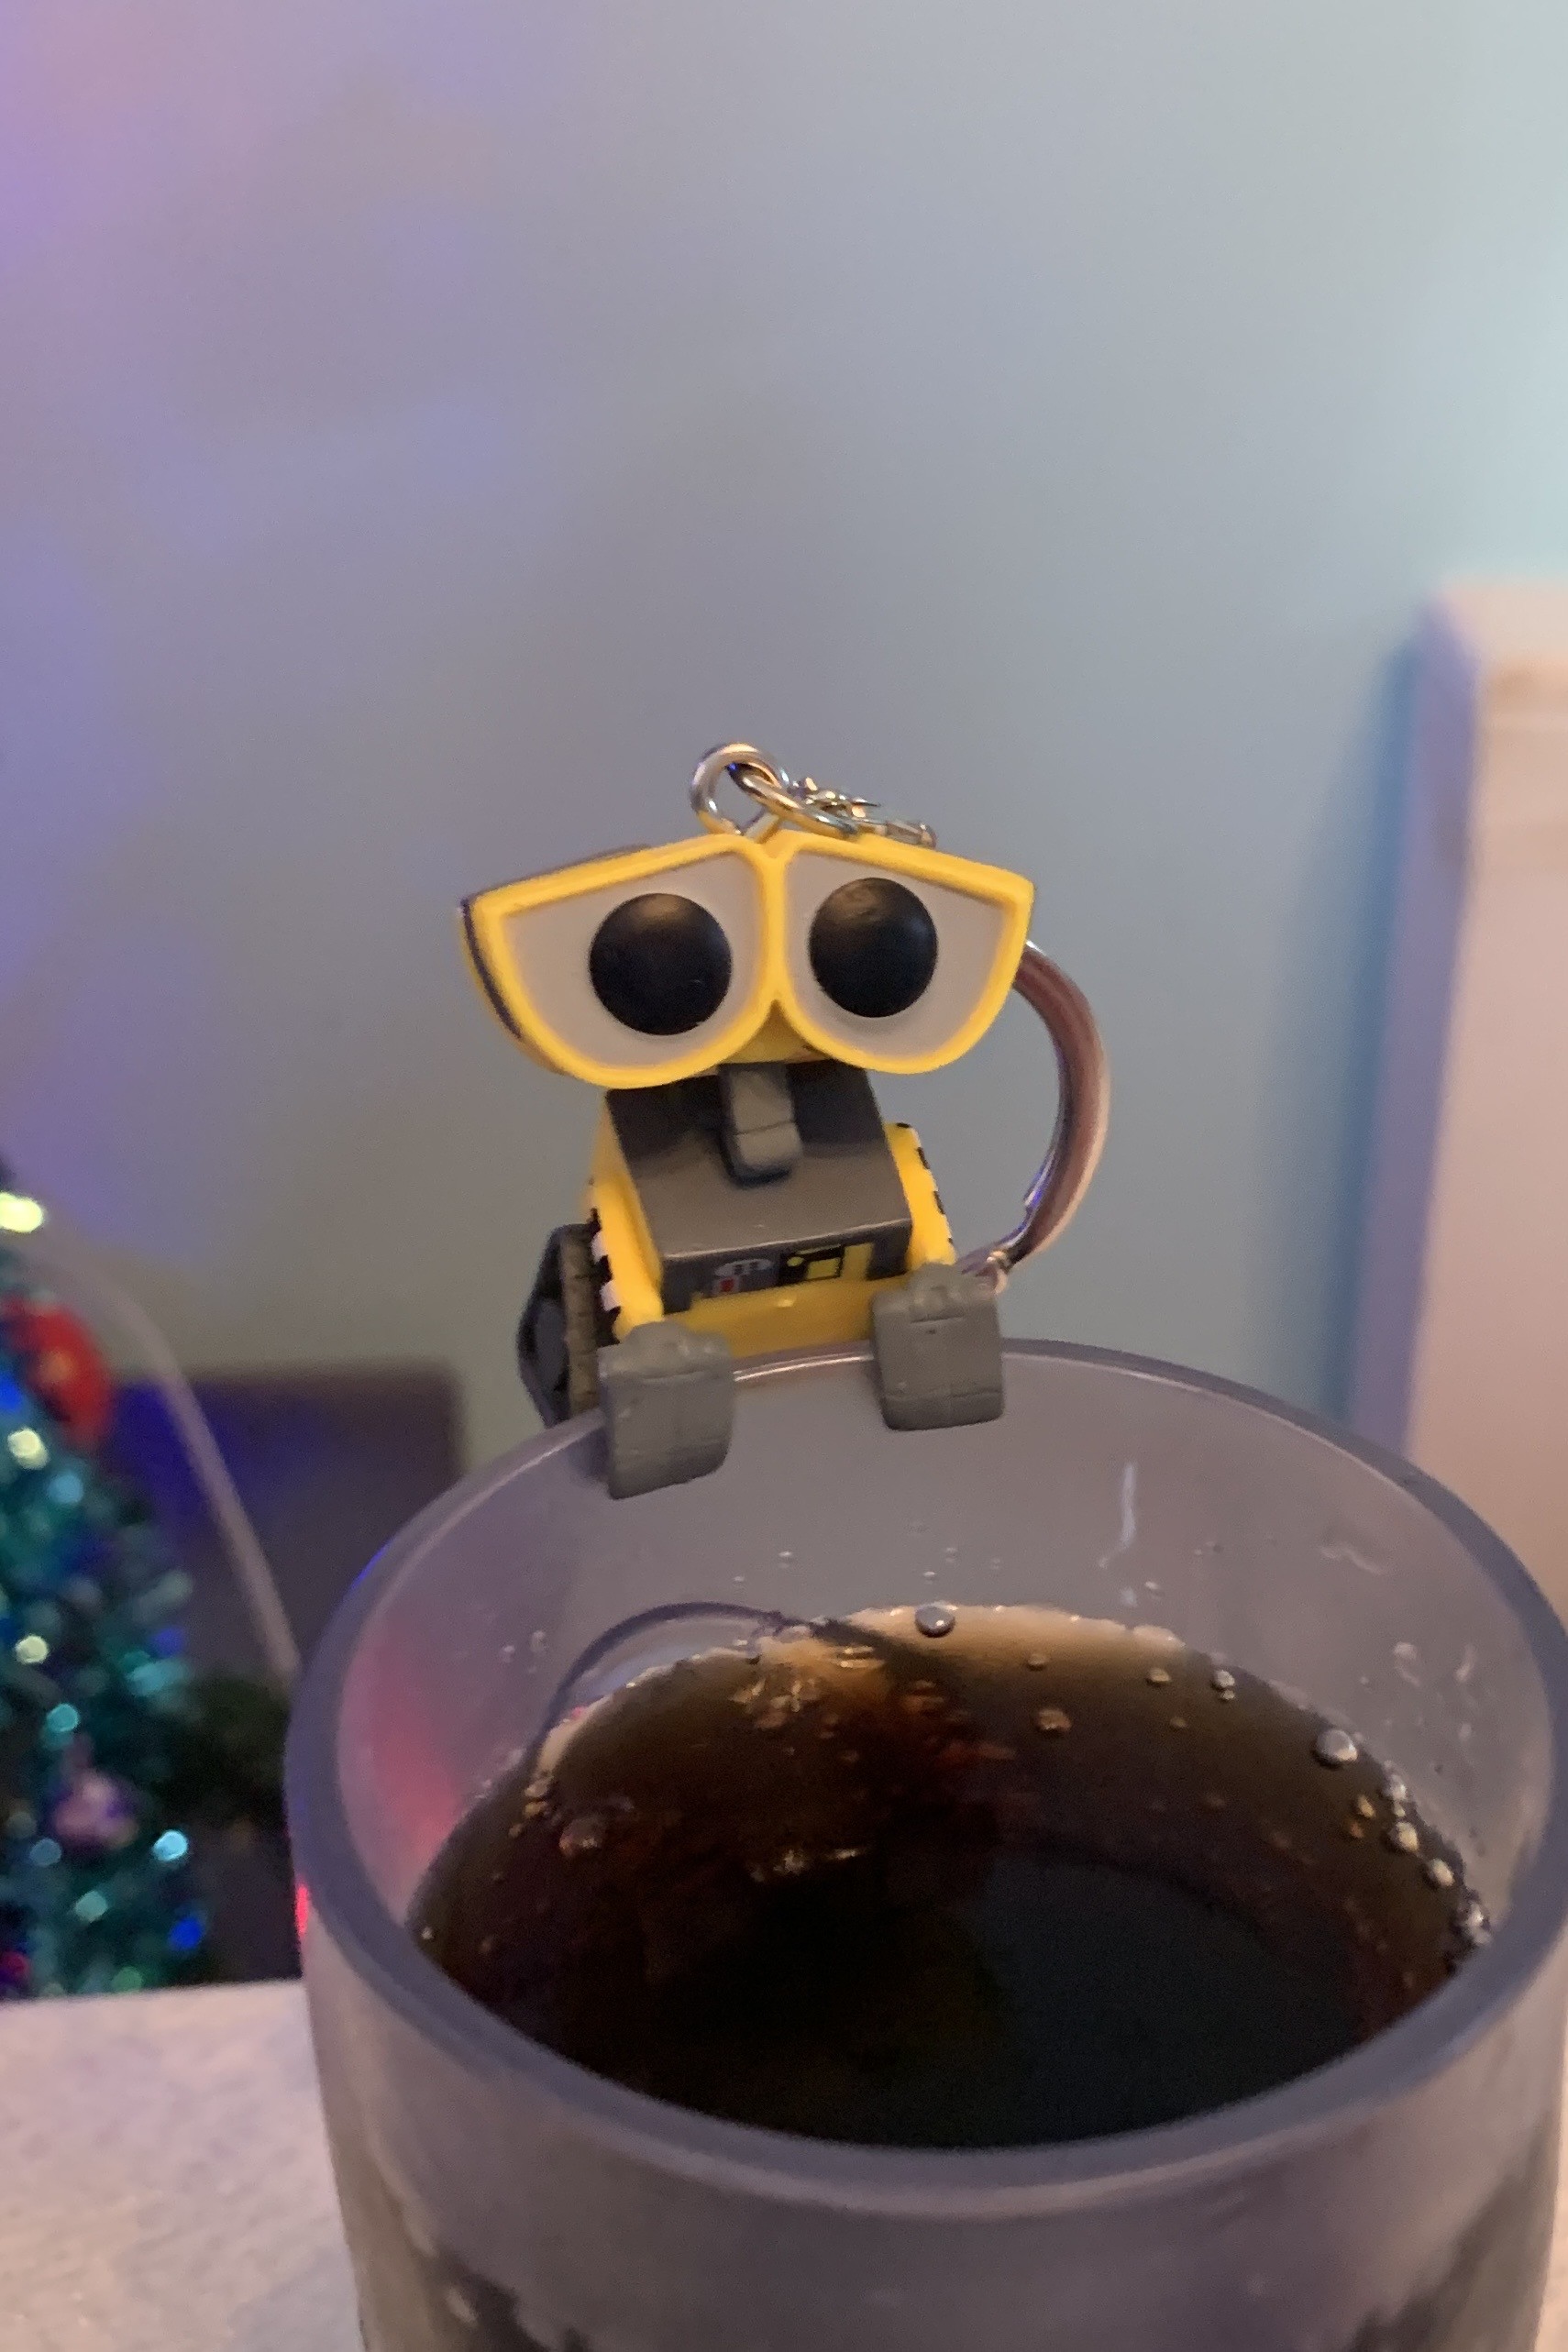 A small WALL-E from Disney using his grippers to hold onto the edge of a glass filled with coke